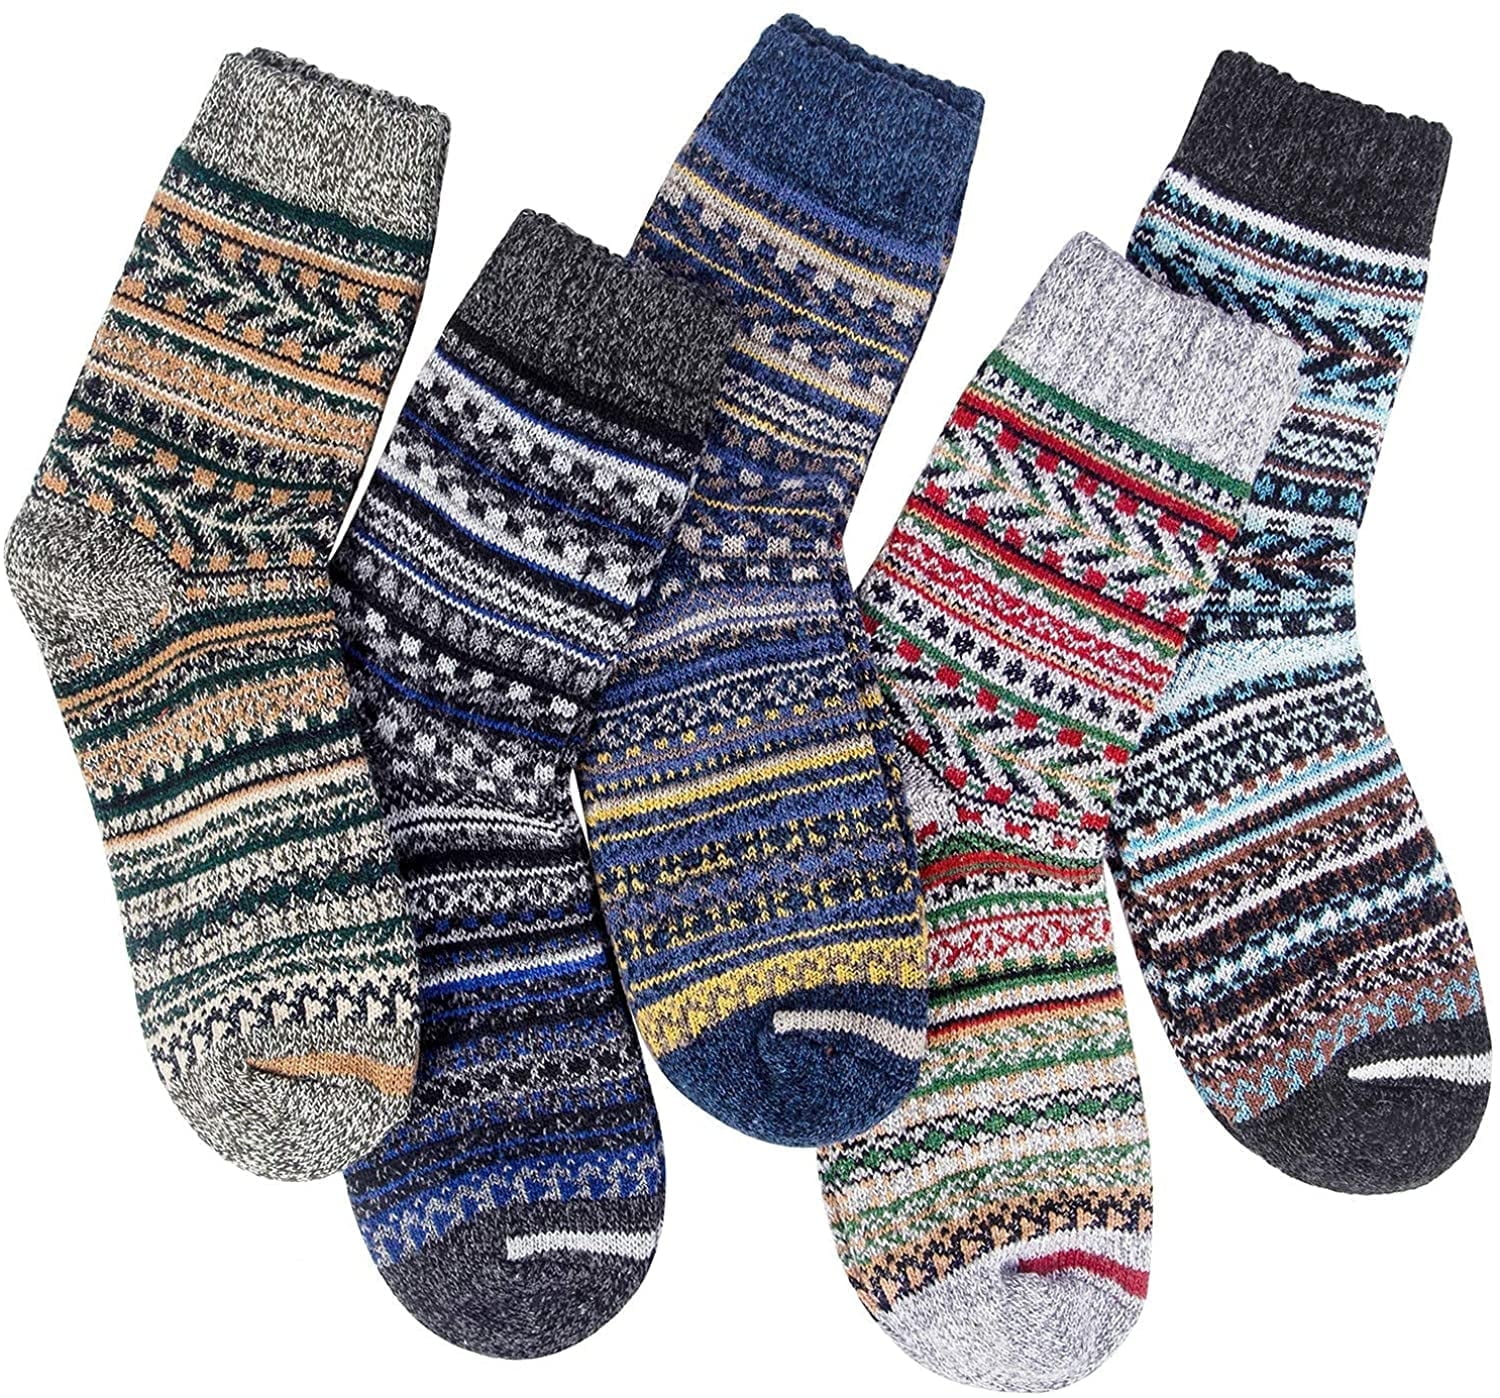 Immekey 5 Pairs Wool Socks for Women Gifts Winter Warm Thick Knit Cabin Cozy Crew Socks, Women's, Size: One Size